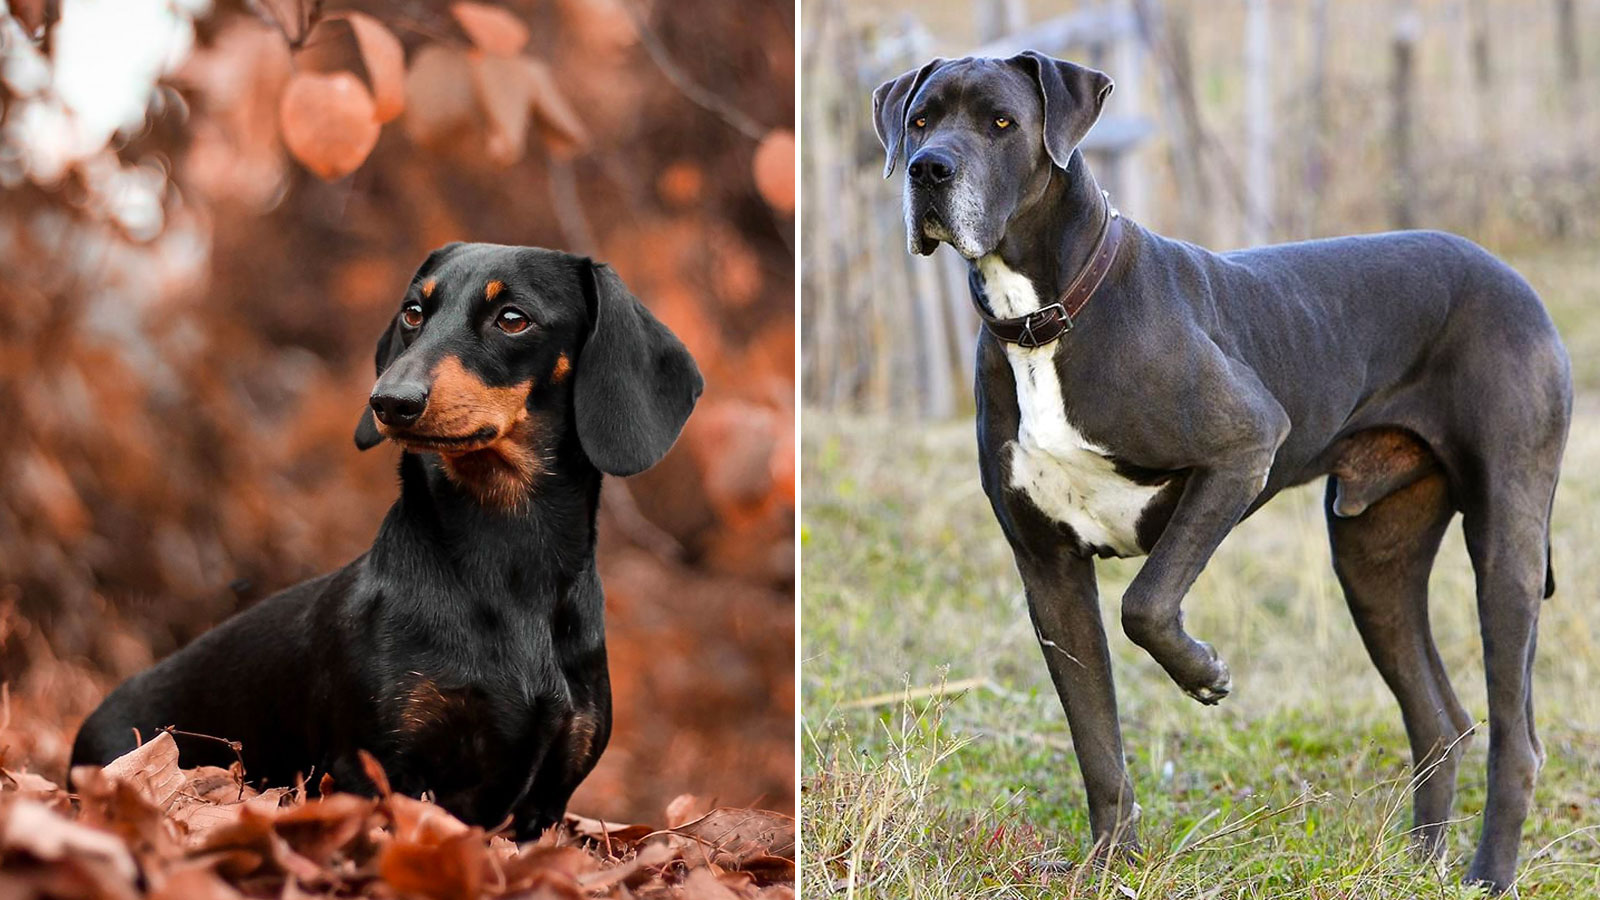 You got: Dachshund and Great Dane! What Big Dog and Small Dog Combo Are You? 🐶